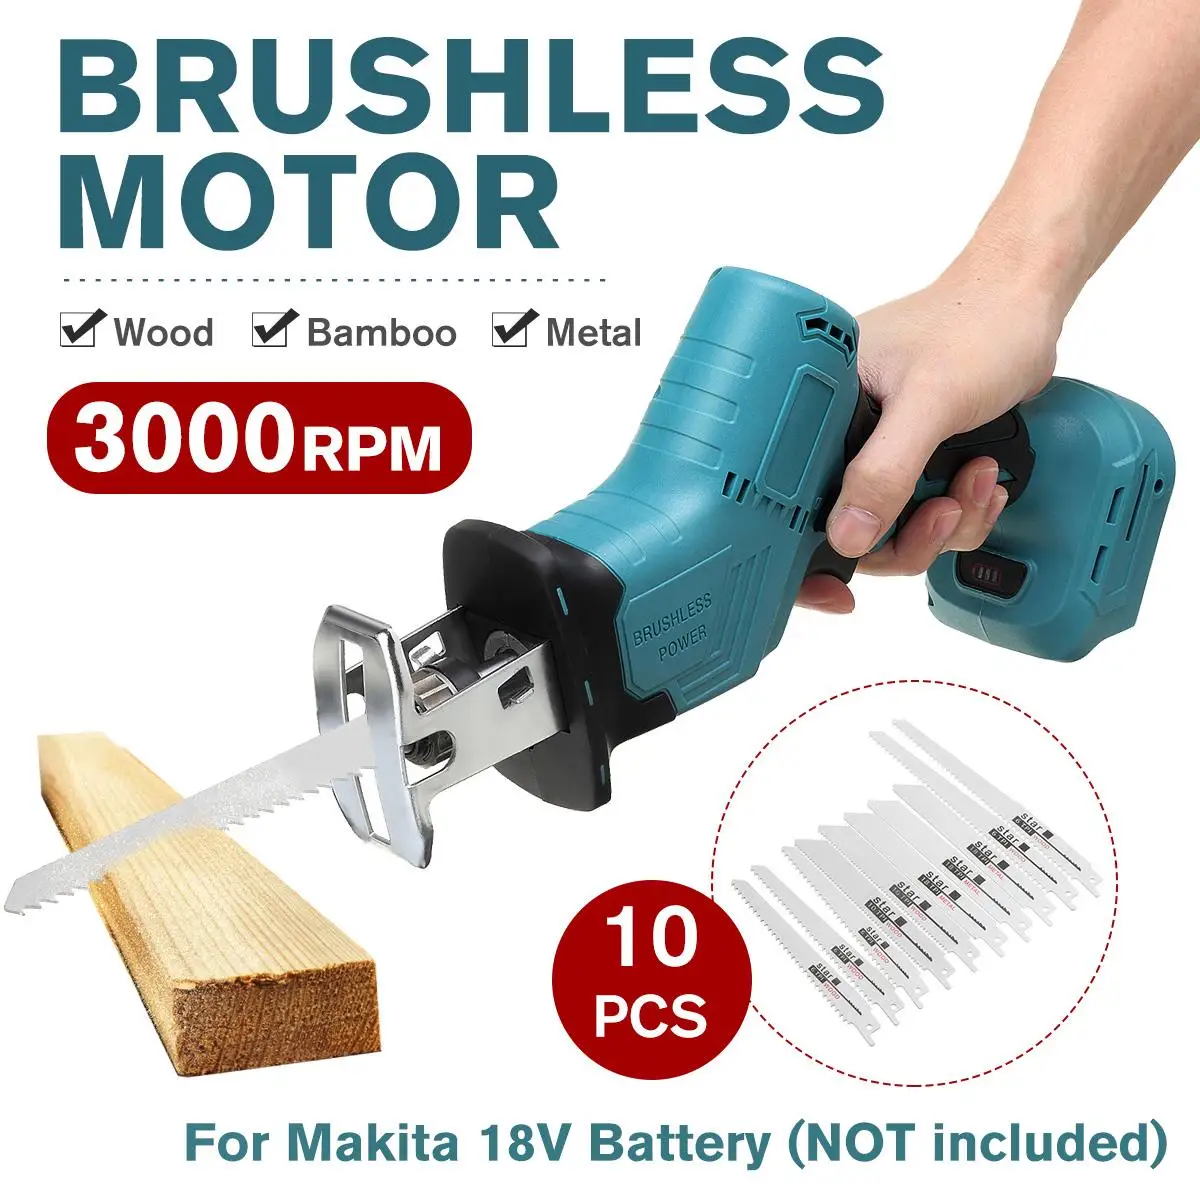 

Drillpro 3000rpm Brushless Reciprocating Saw Electric Saw 10Pcs Saw Blades Metal Wood Cutting Machine for Makita 18V Battery